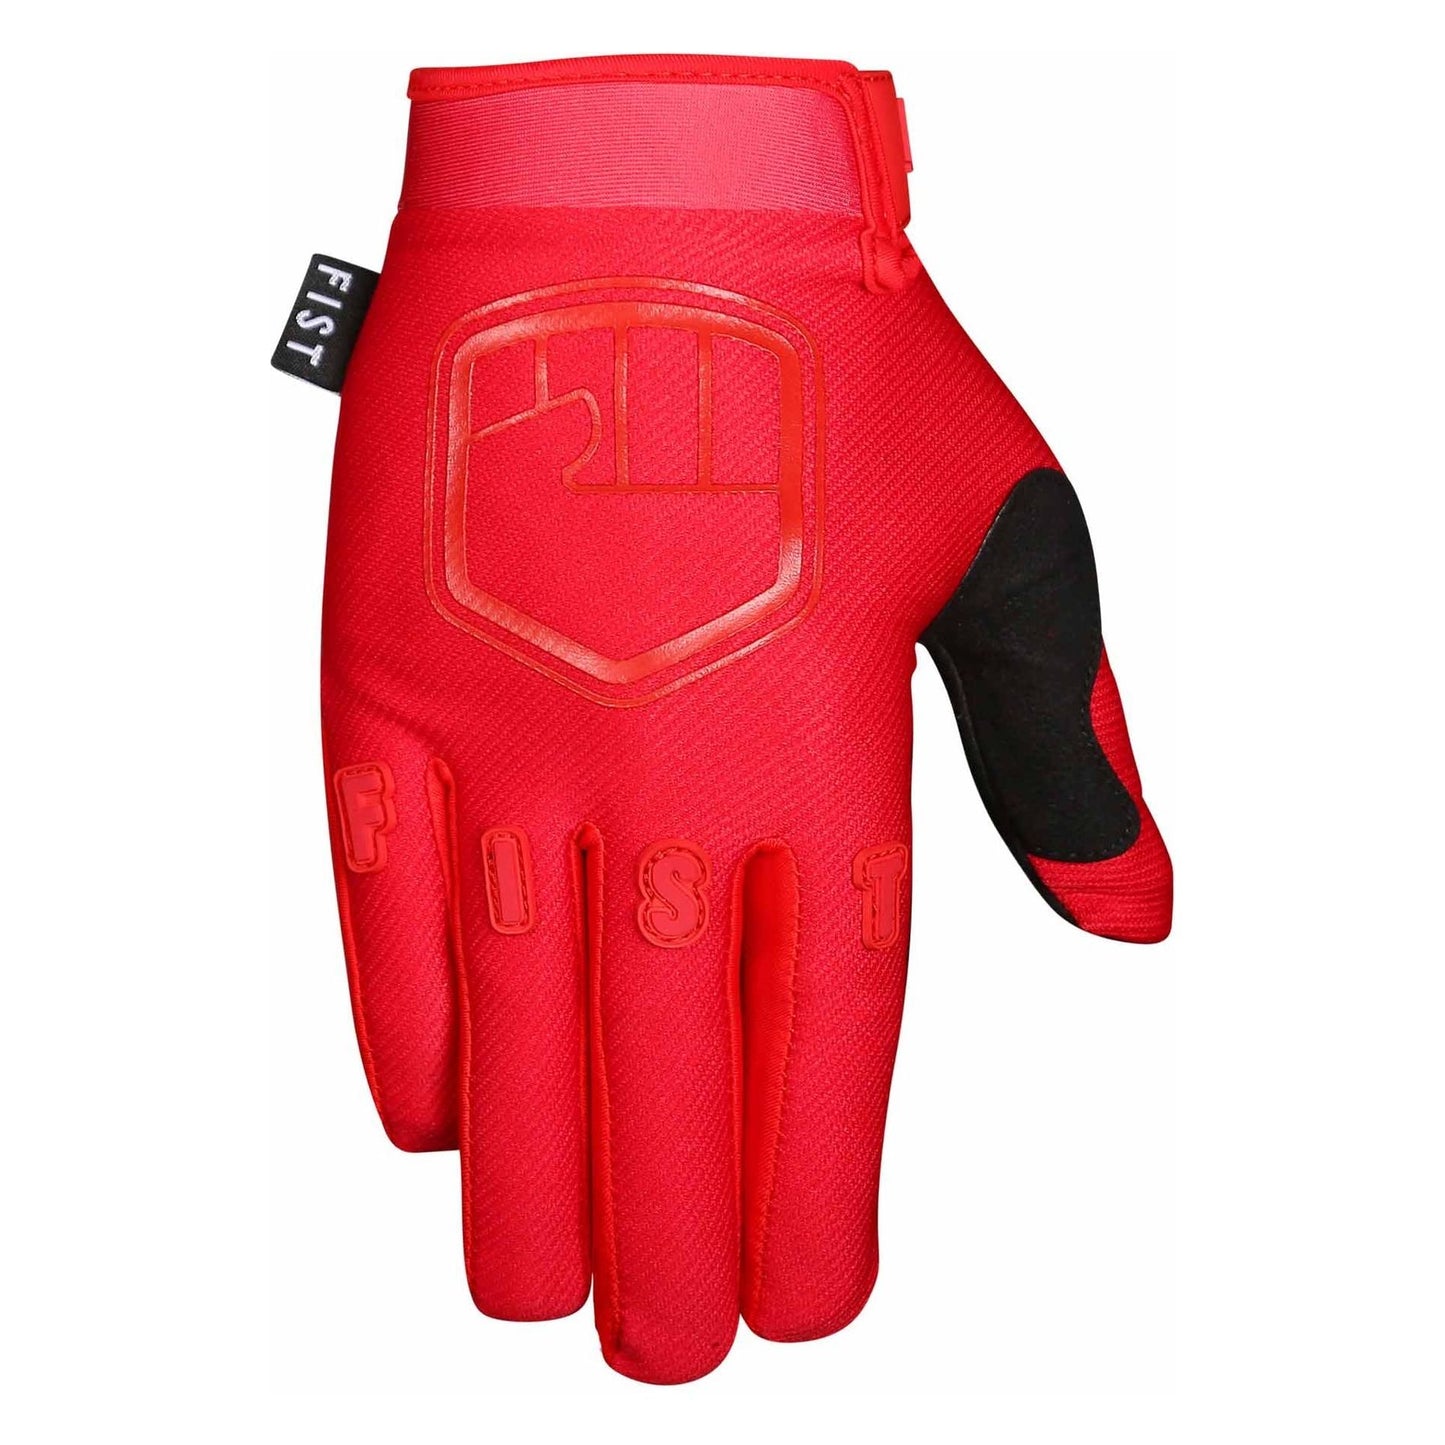 Fist Handwear Stocker Youth Strapped Glove - Youth M - Red Stocker - Image 1